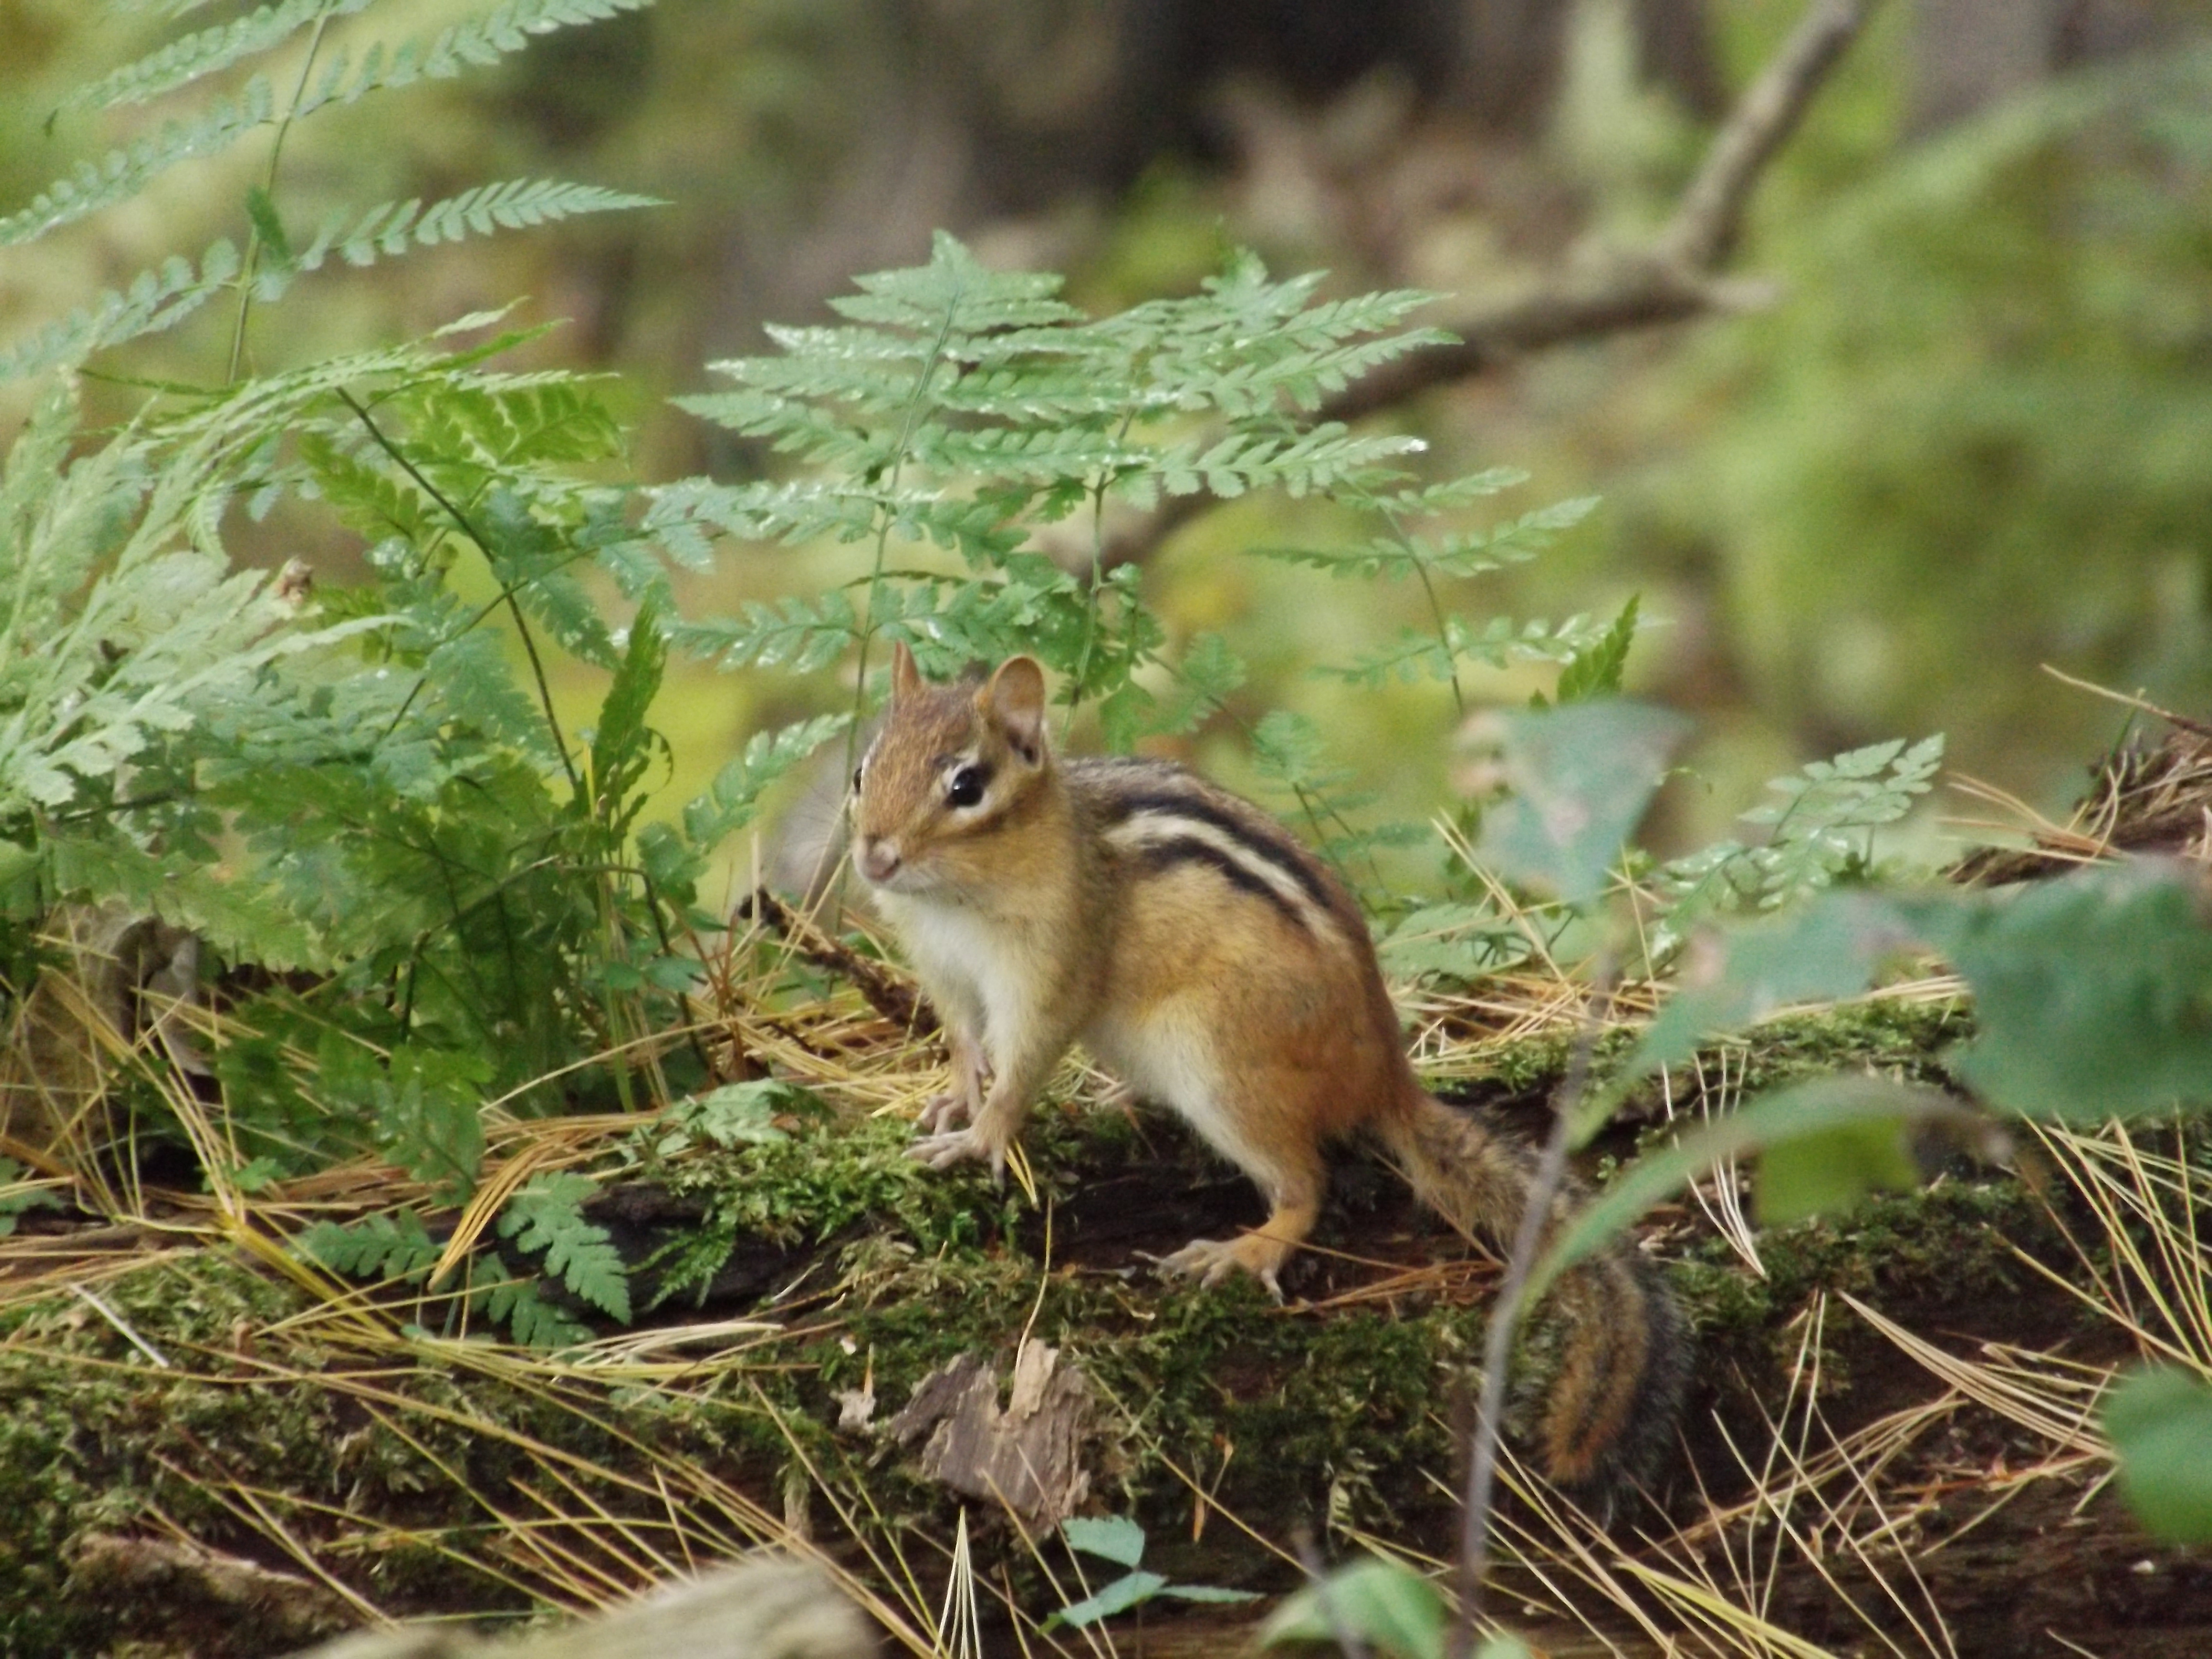 A chipmunk pauses on a fallen log. Photo: Erica Dailey, natureupnorth.org